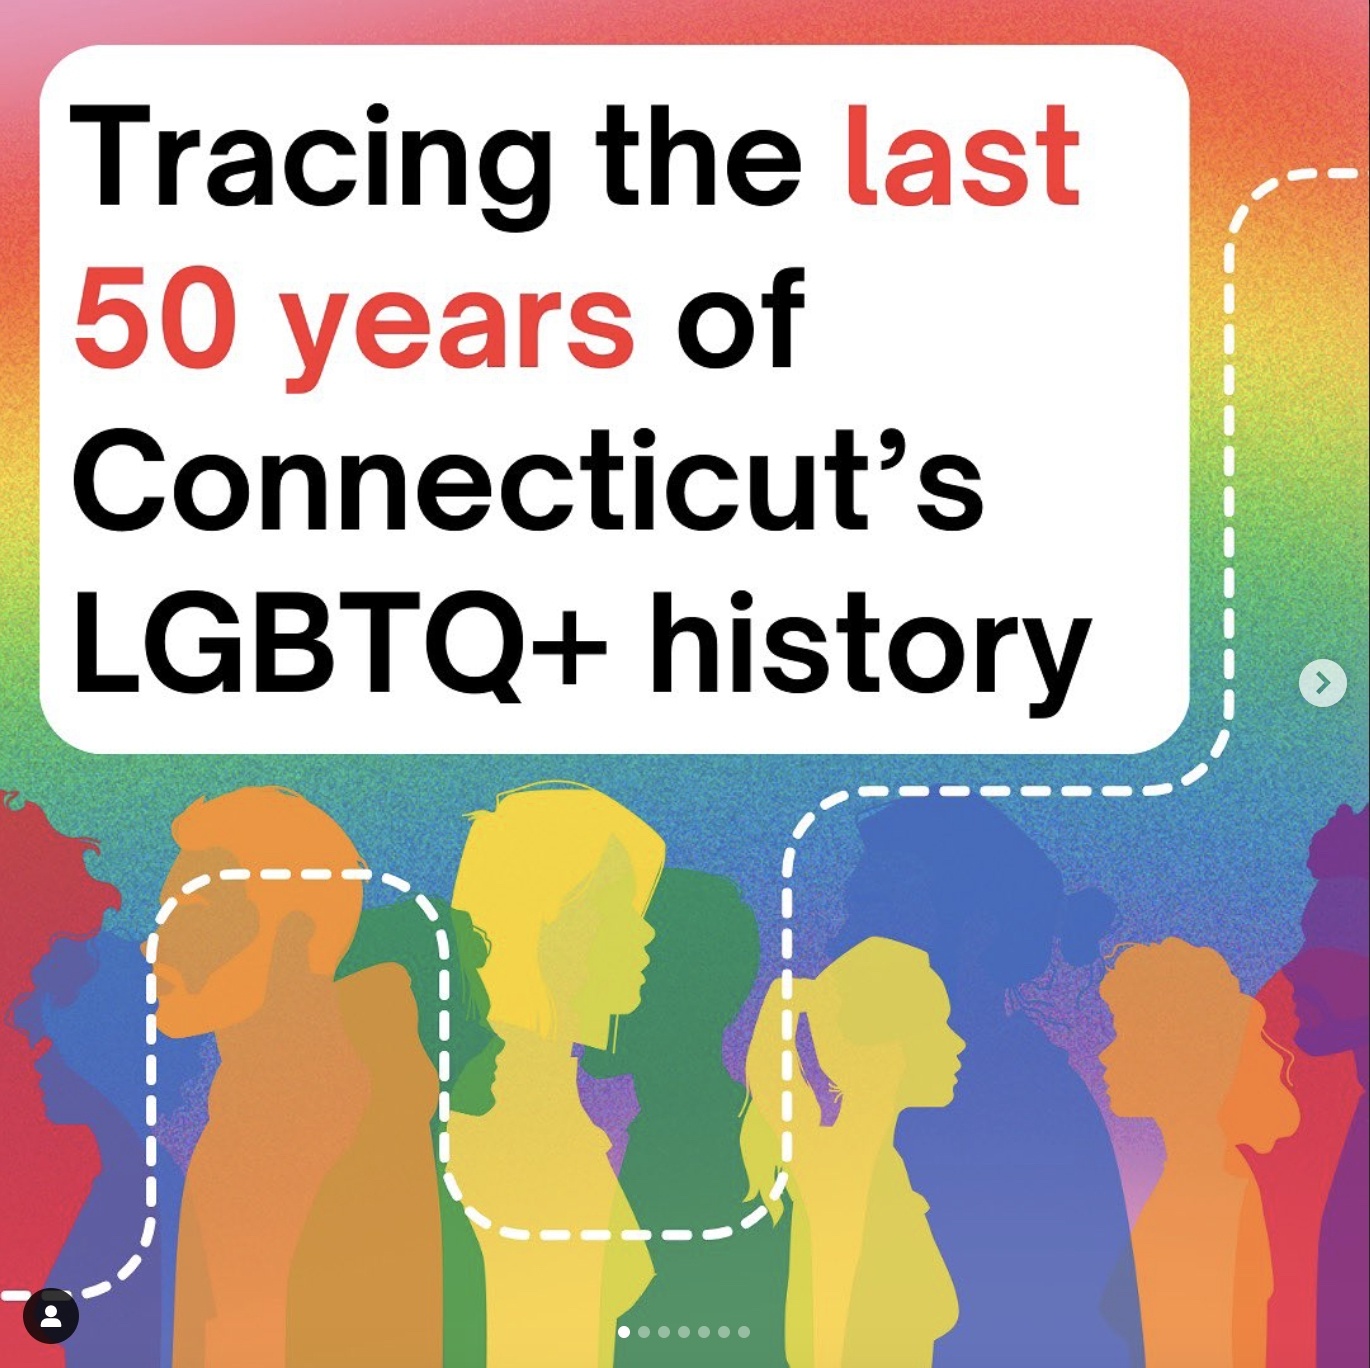 Graphic that reads "Tracing the last 50 years of Connecticut's LGBTQ+ history"